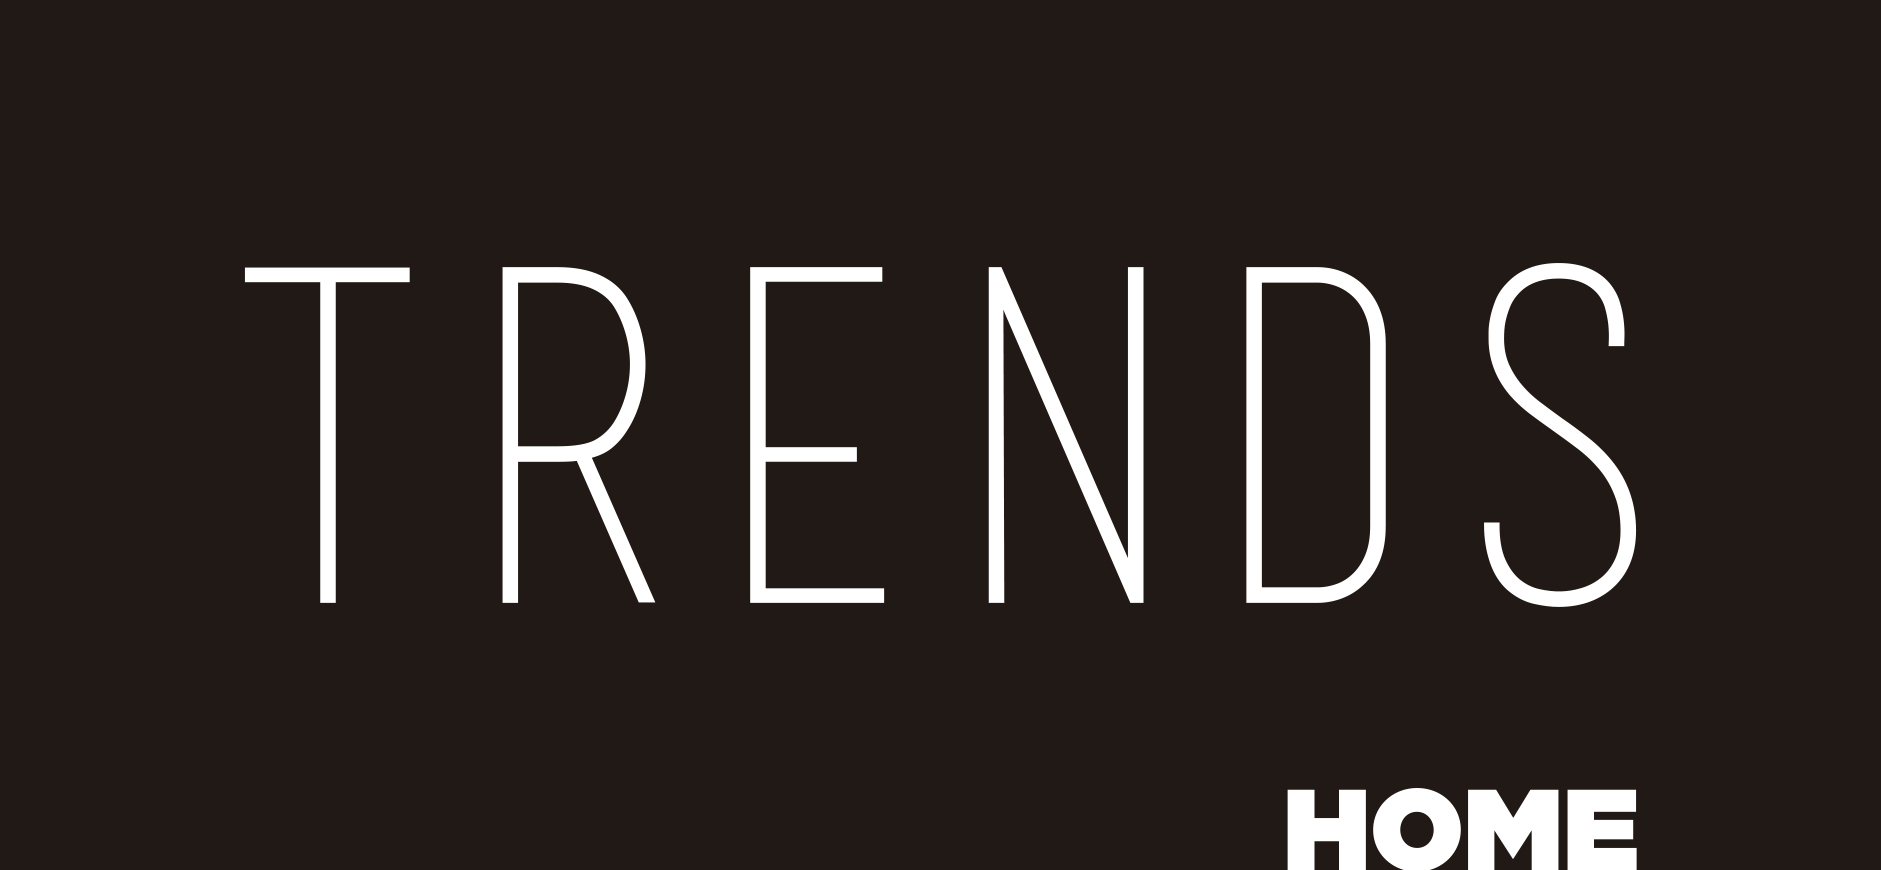 TRENDS HOME selection